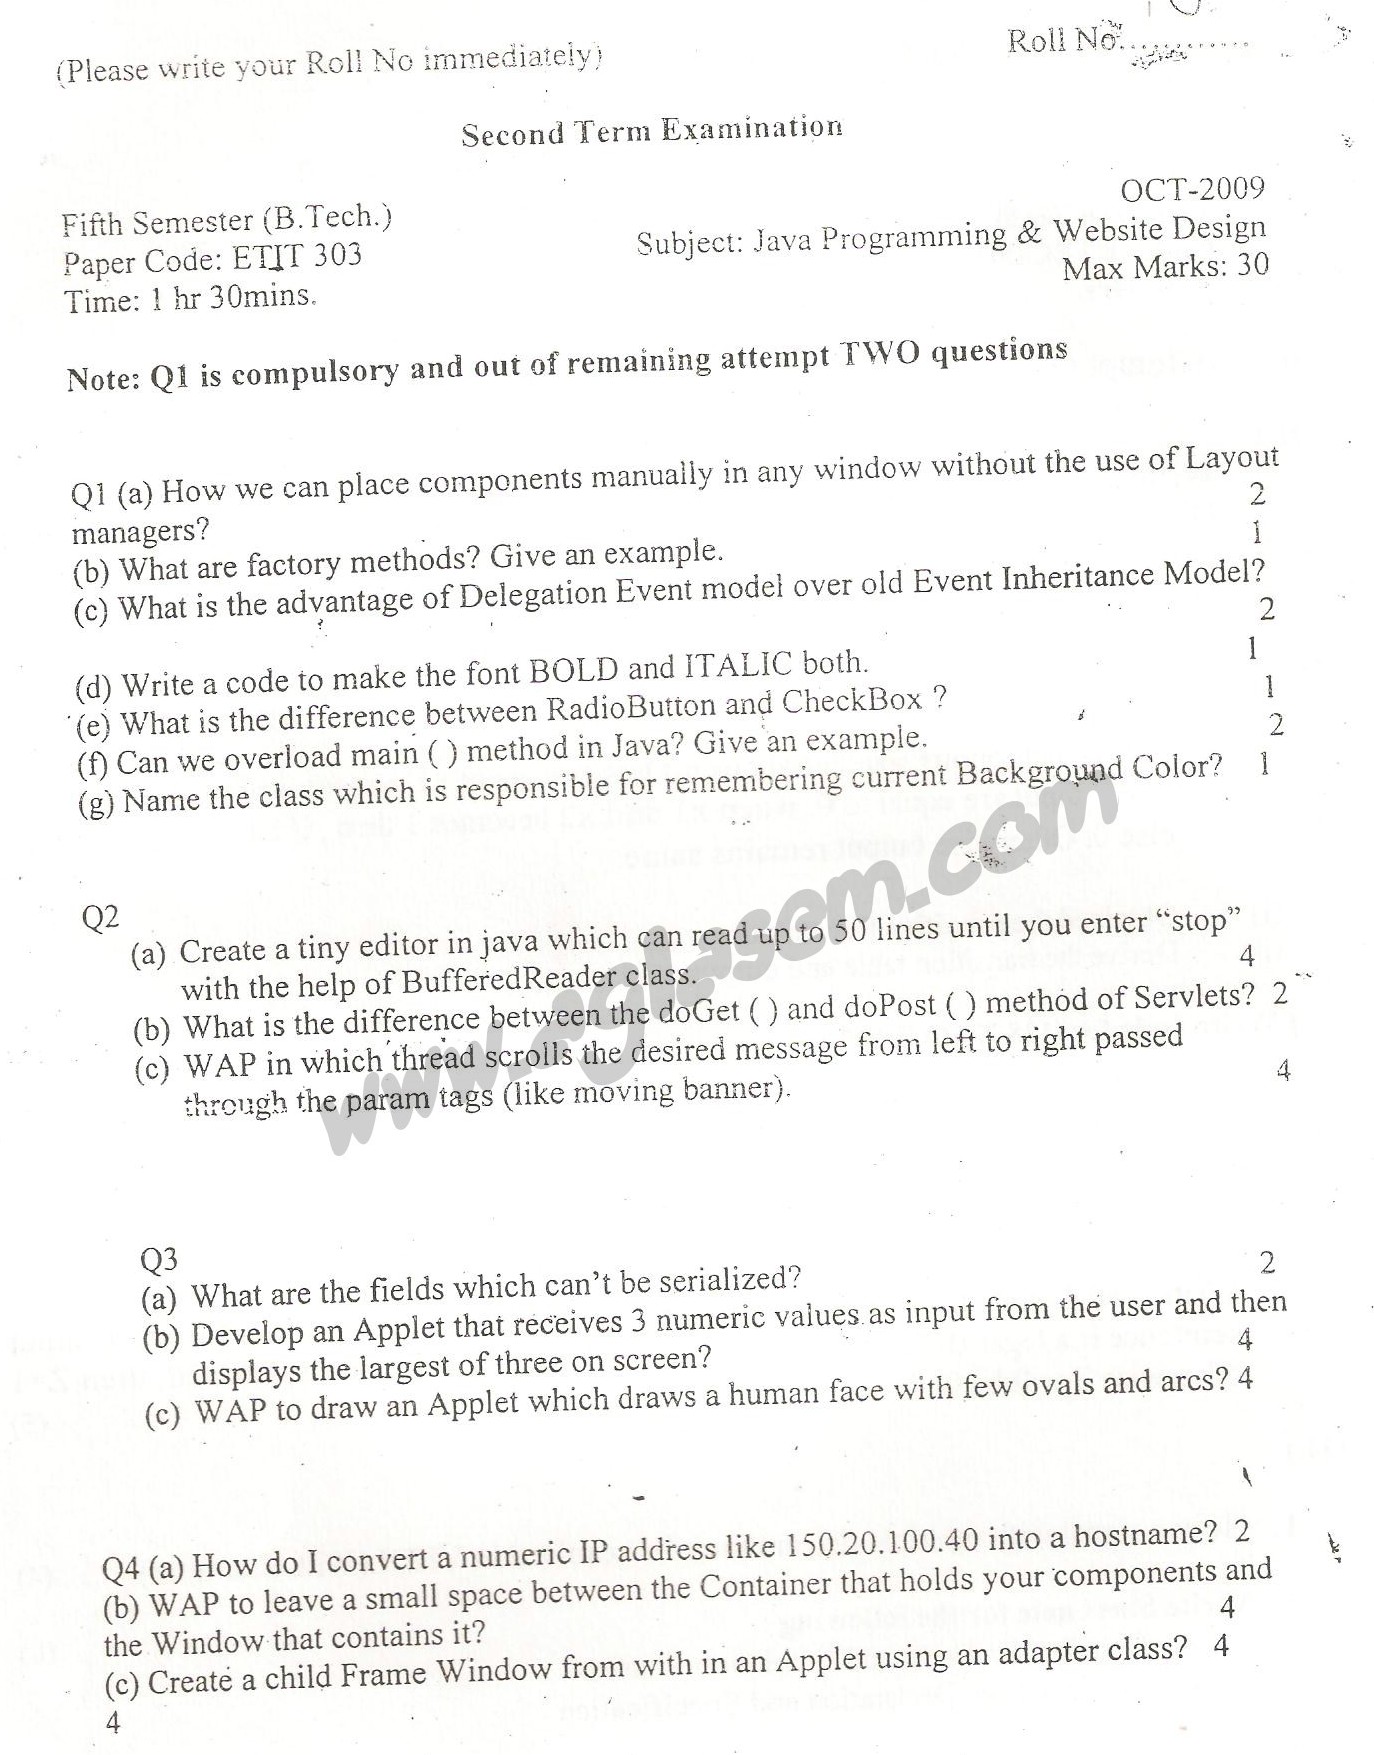 GGSIPU Question Papers Fifth Semester – Second Term 2009 – ETIT-303